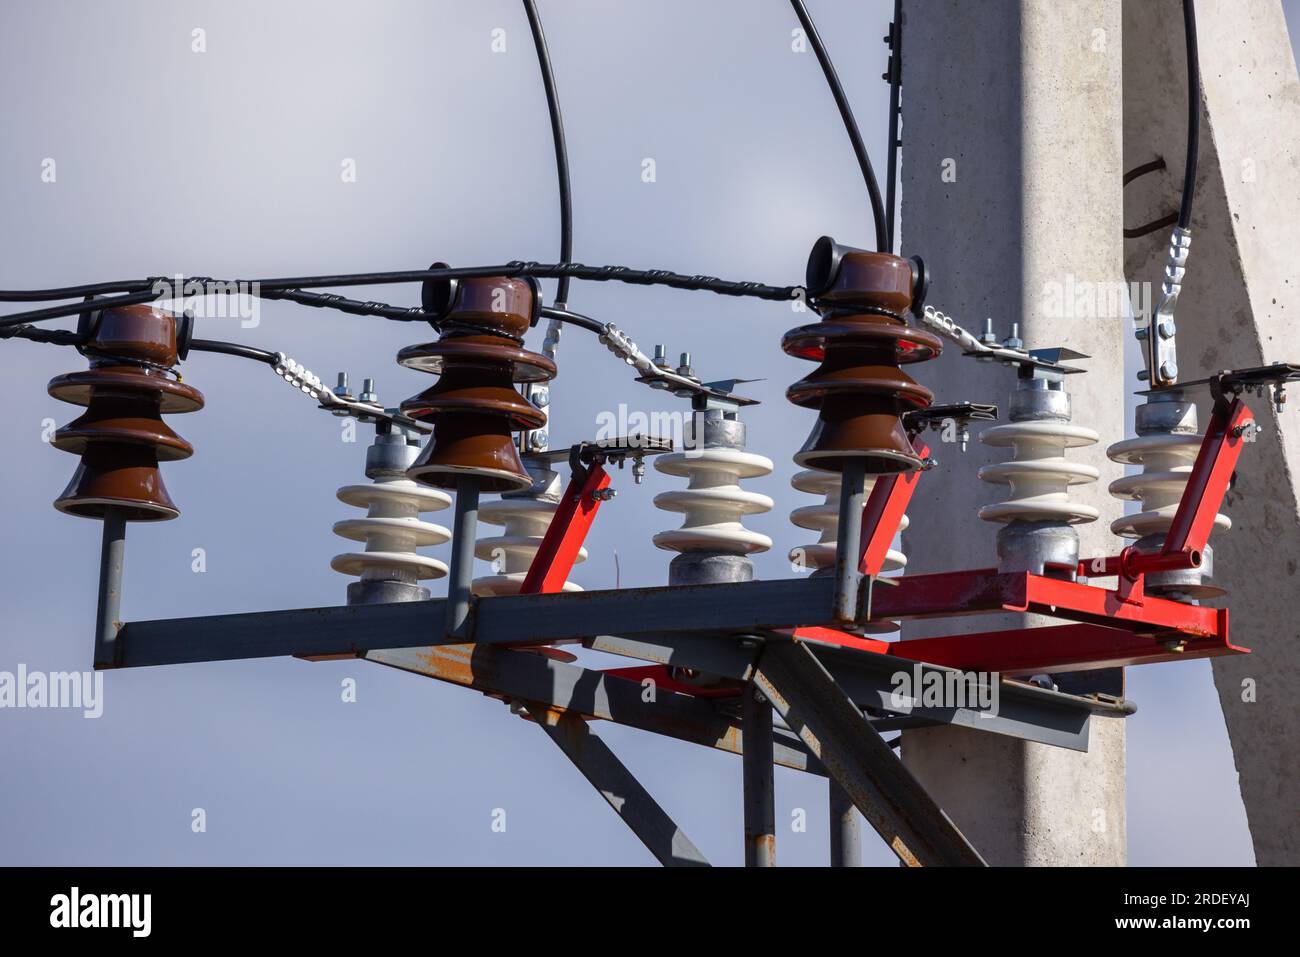 Overhead power line details. High voltage insulators and wires mounted on concrete pylon Stock Photo